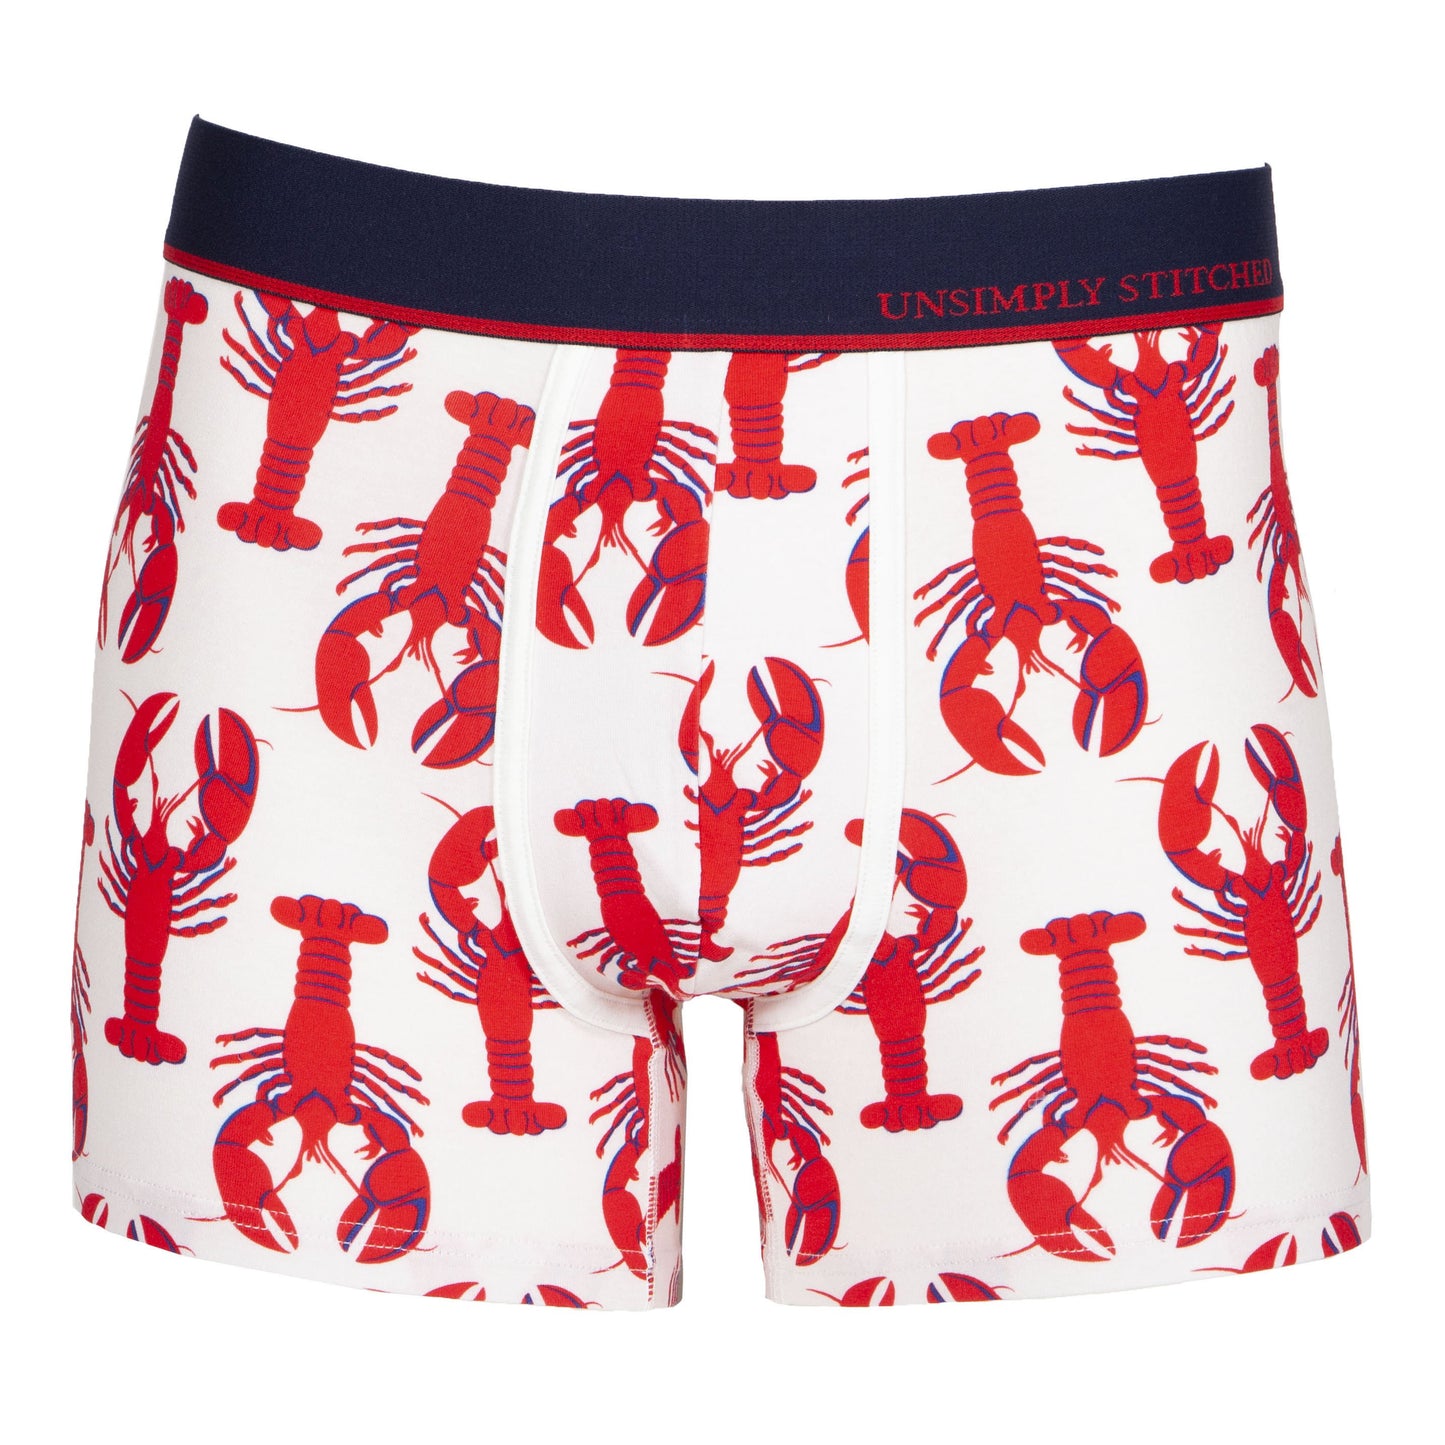 Unsimply Stitched White Large Lobster Trunk